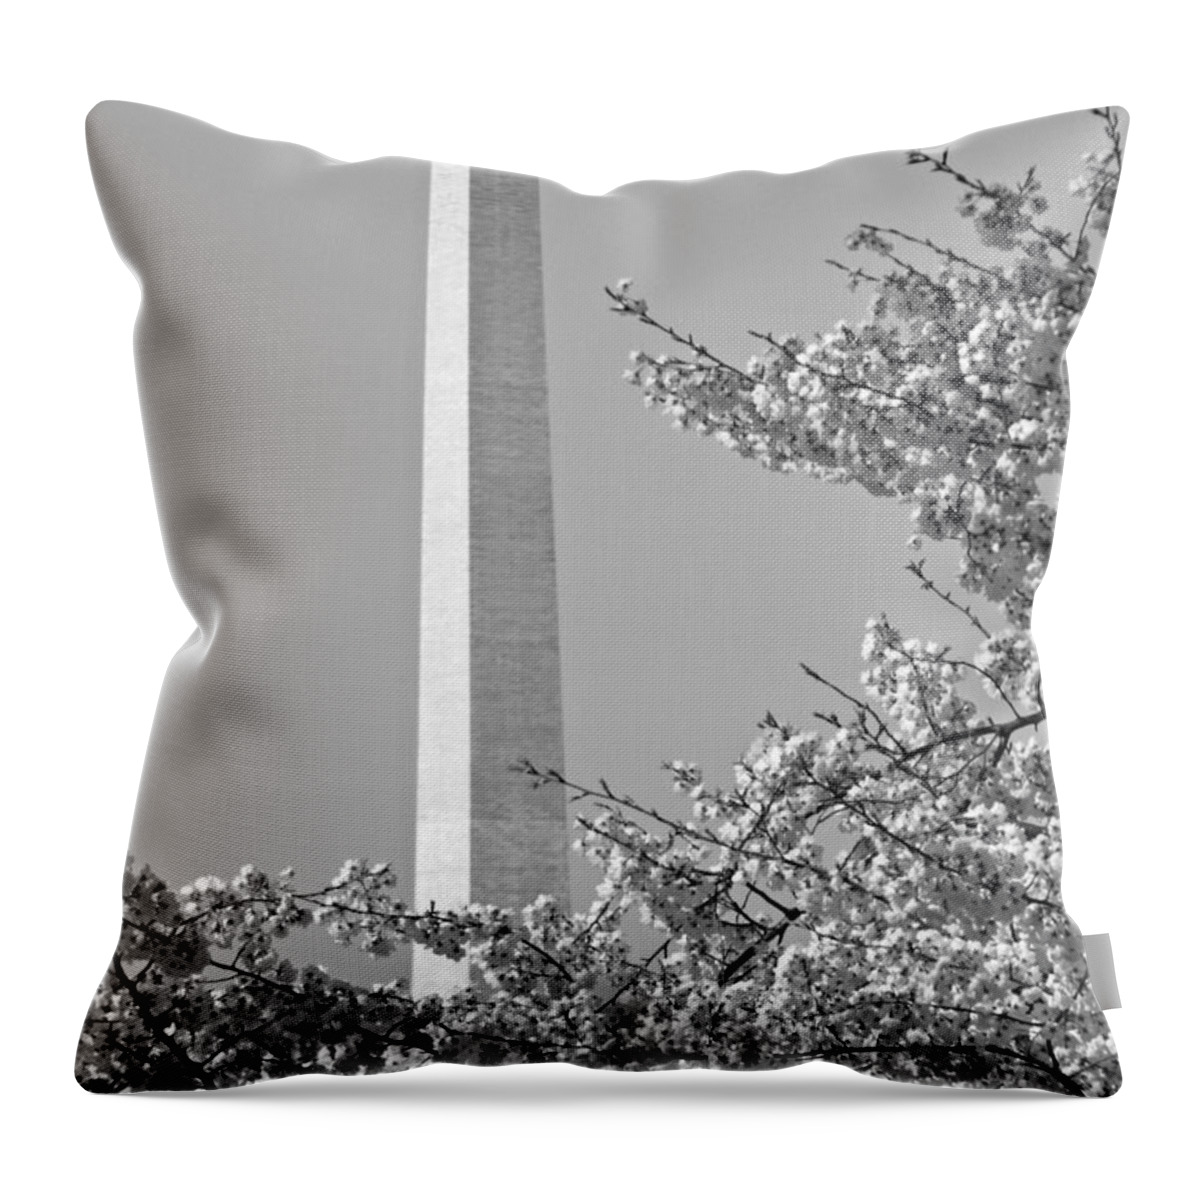 Washington Monument Photographs Throw Pillow featuring the photograph Washington Monument Amidst the Cherry Blossoms by Emmy Vickers